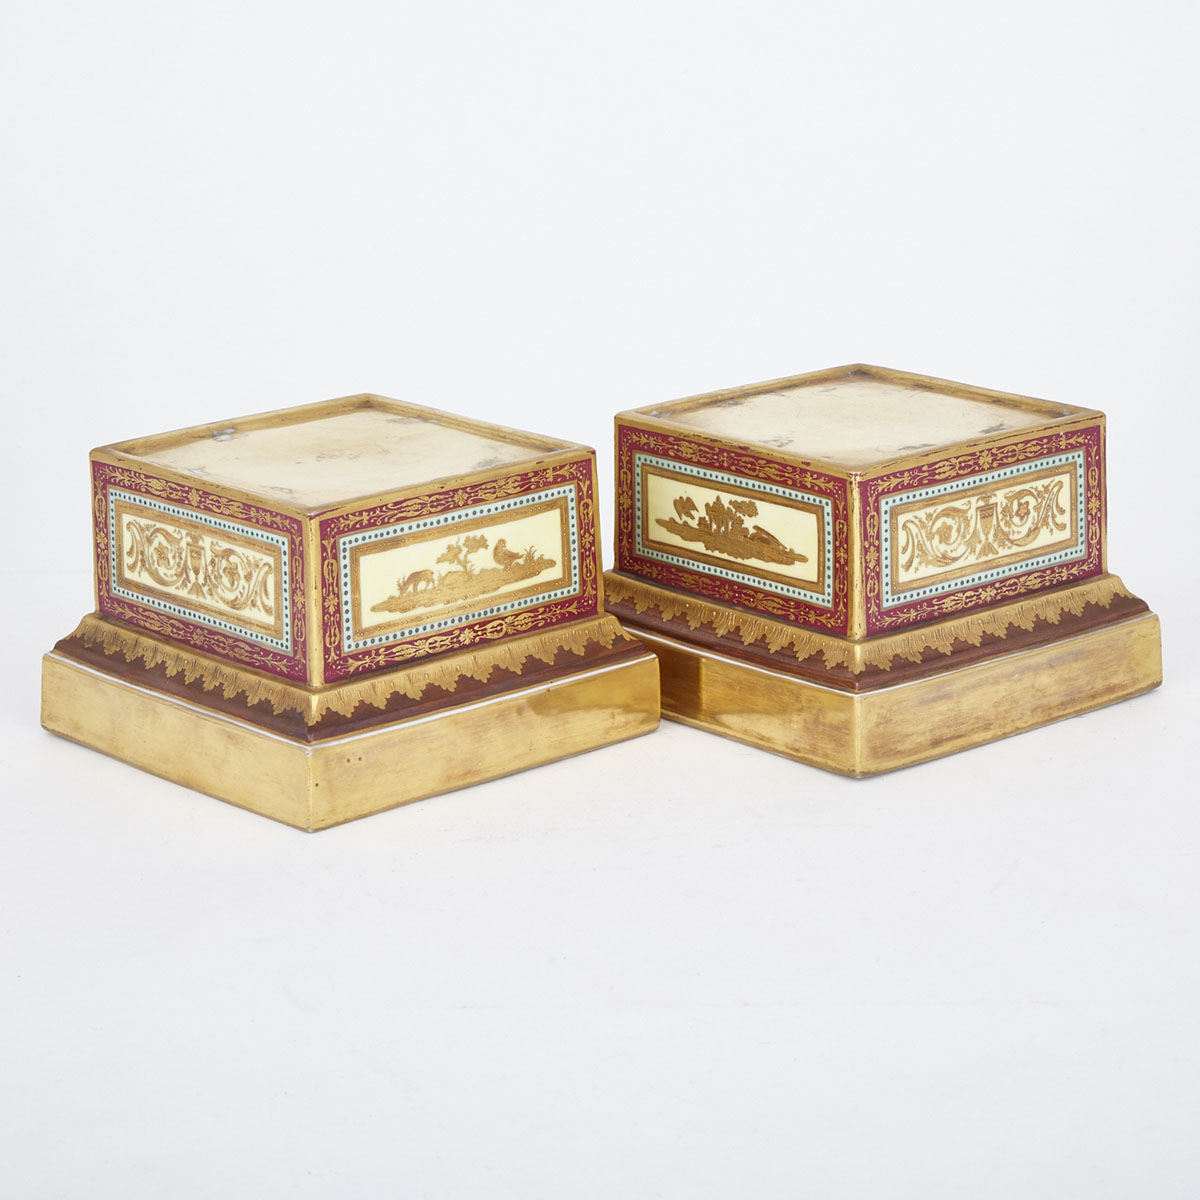 Pair of Gilt and Red Decorated Vienna Porcelain Neoclassical Bases, 19th century